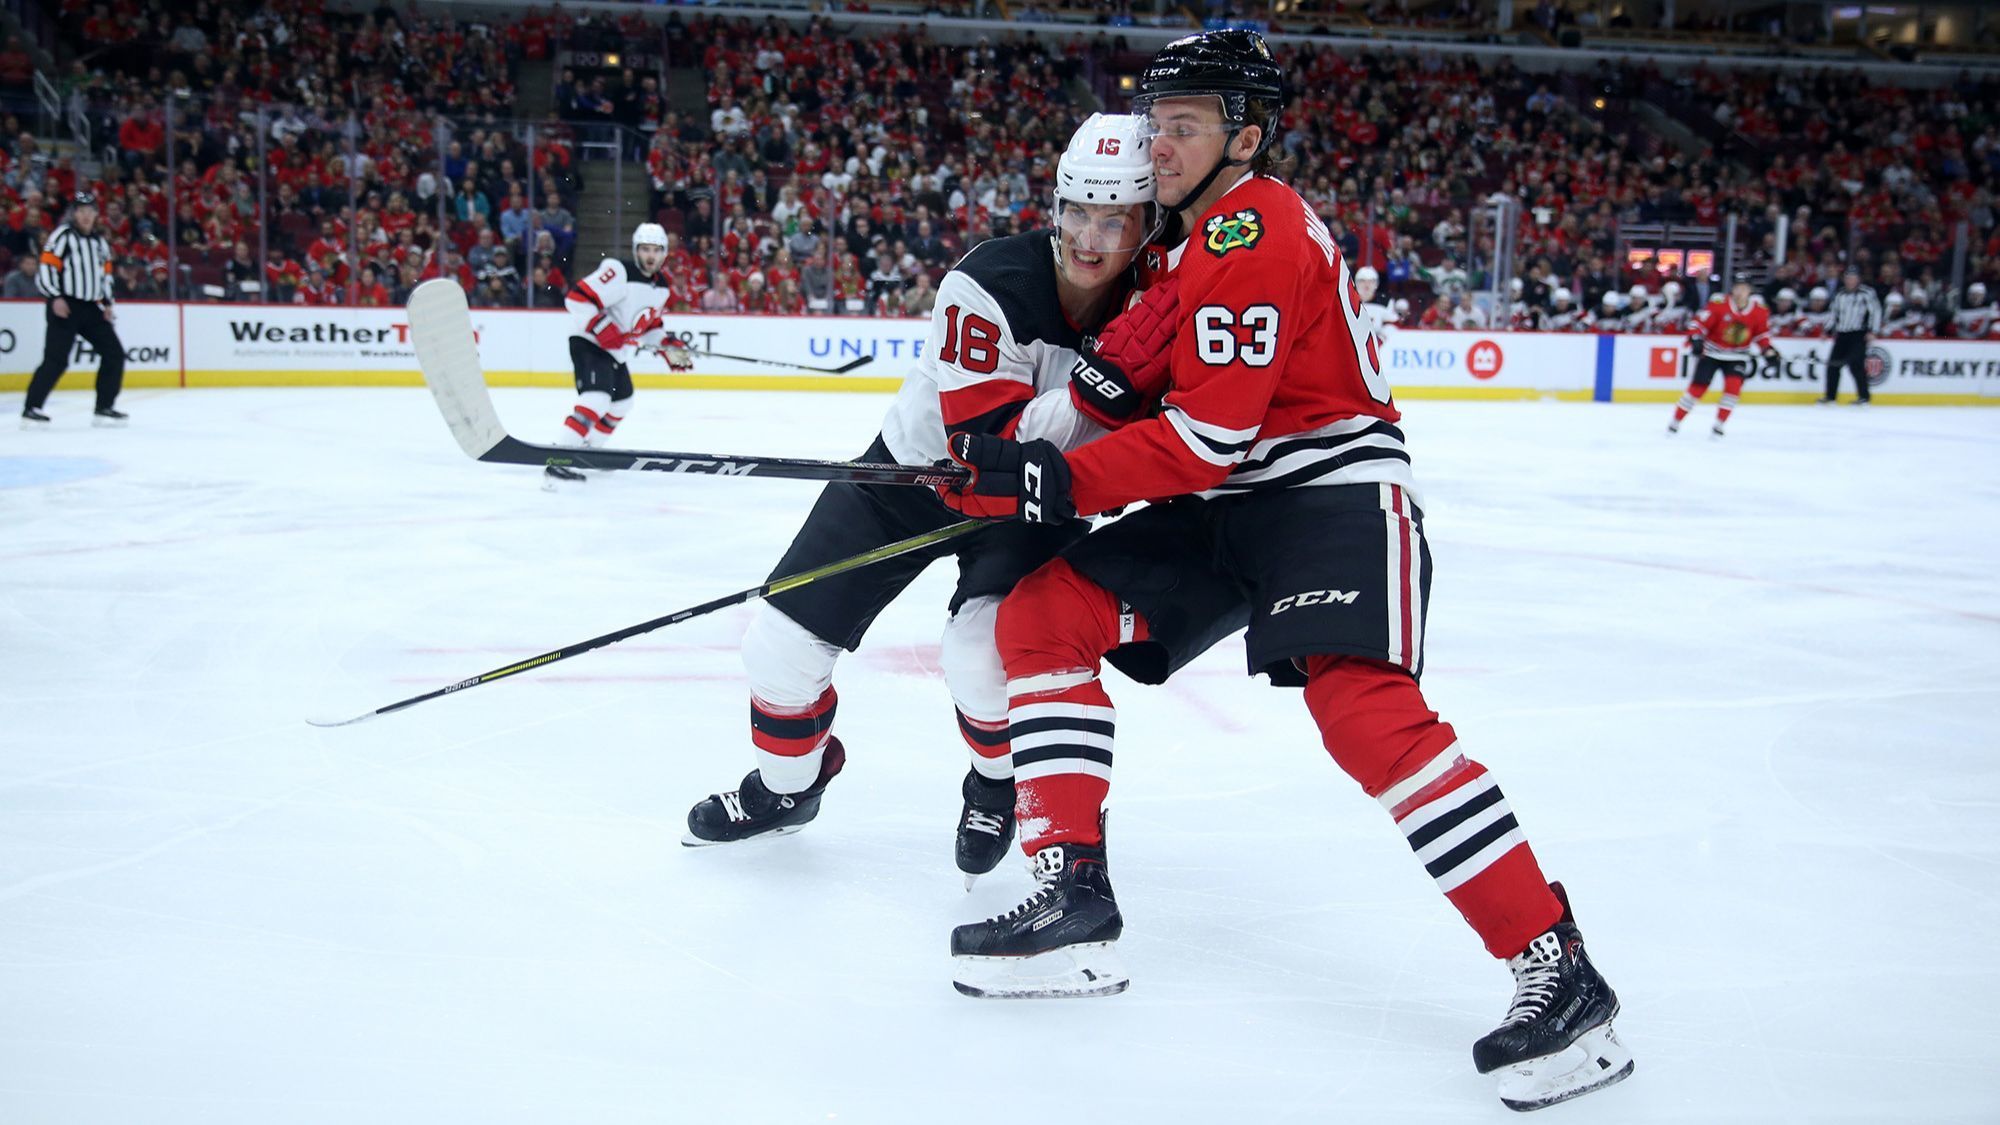 Carl Dahlstrom is the 1st of 6 restricted free agents on the Blackhawks roster to agree to an extension